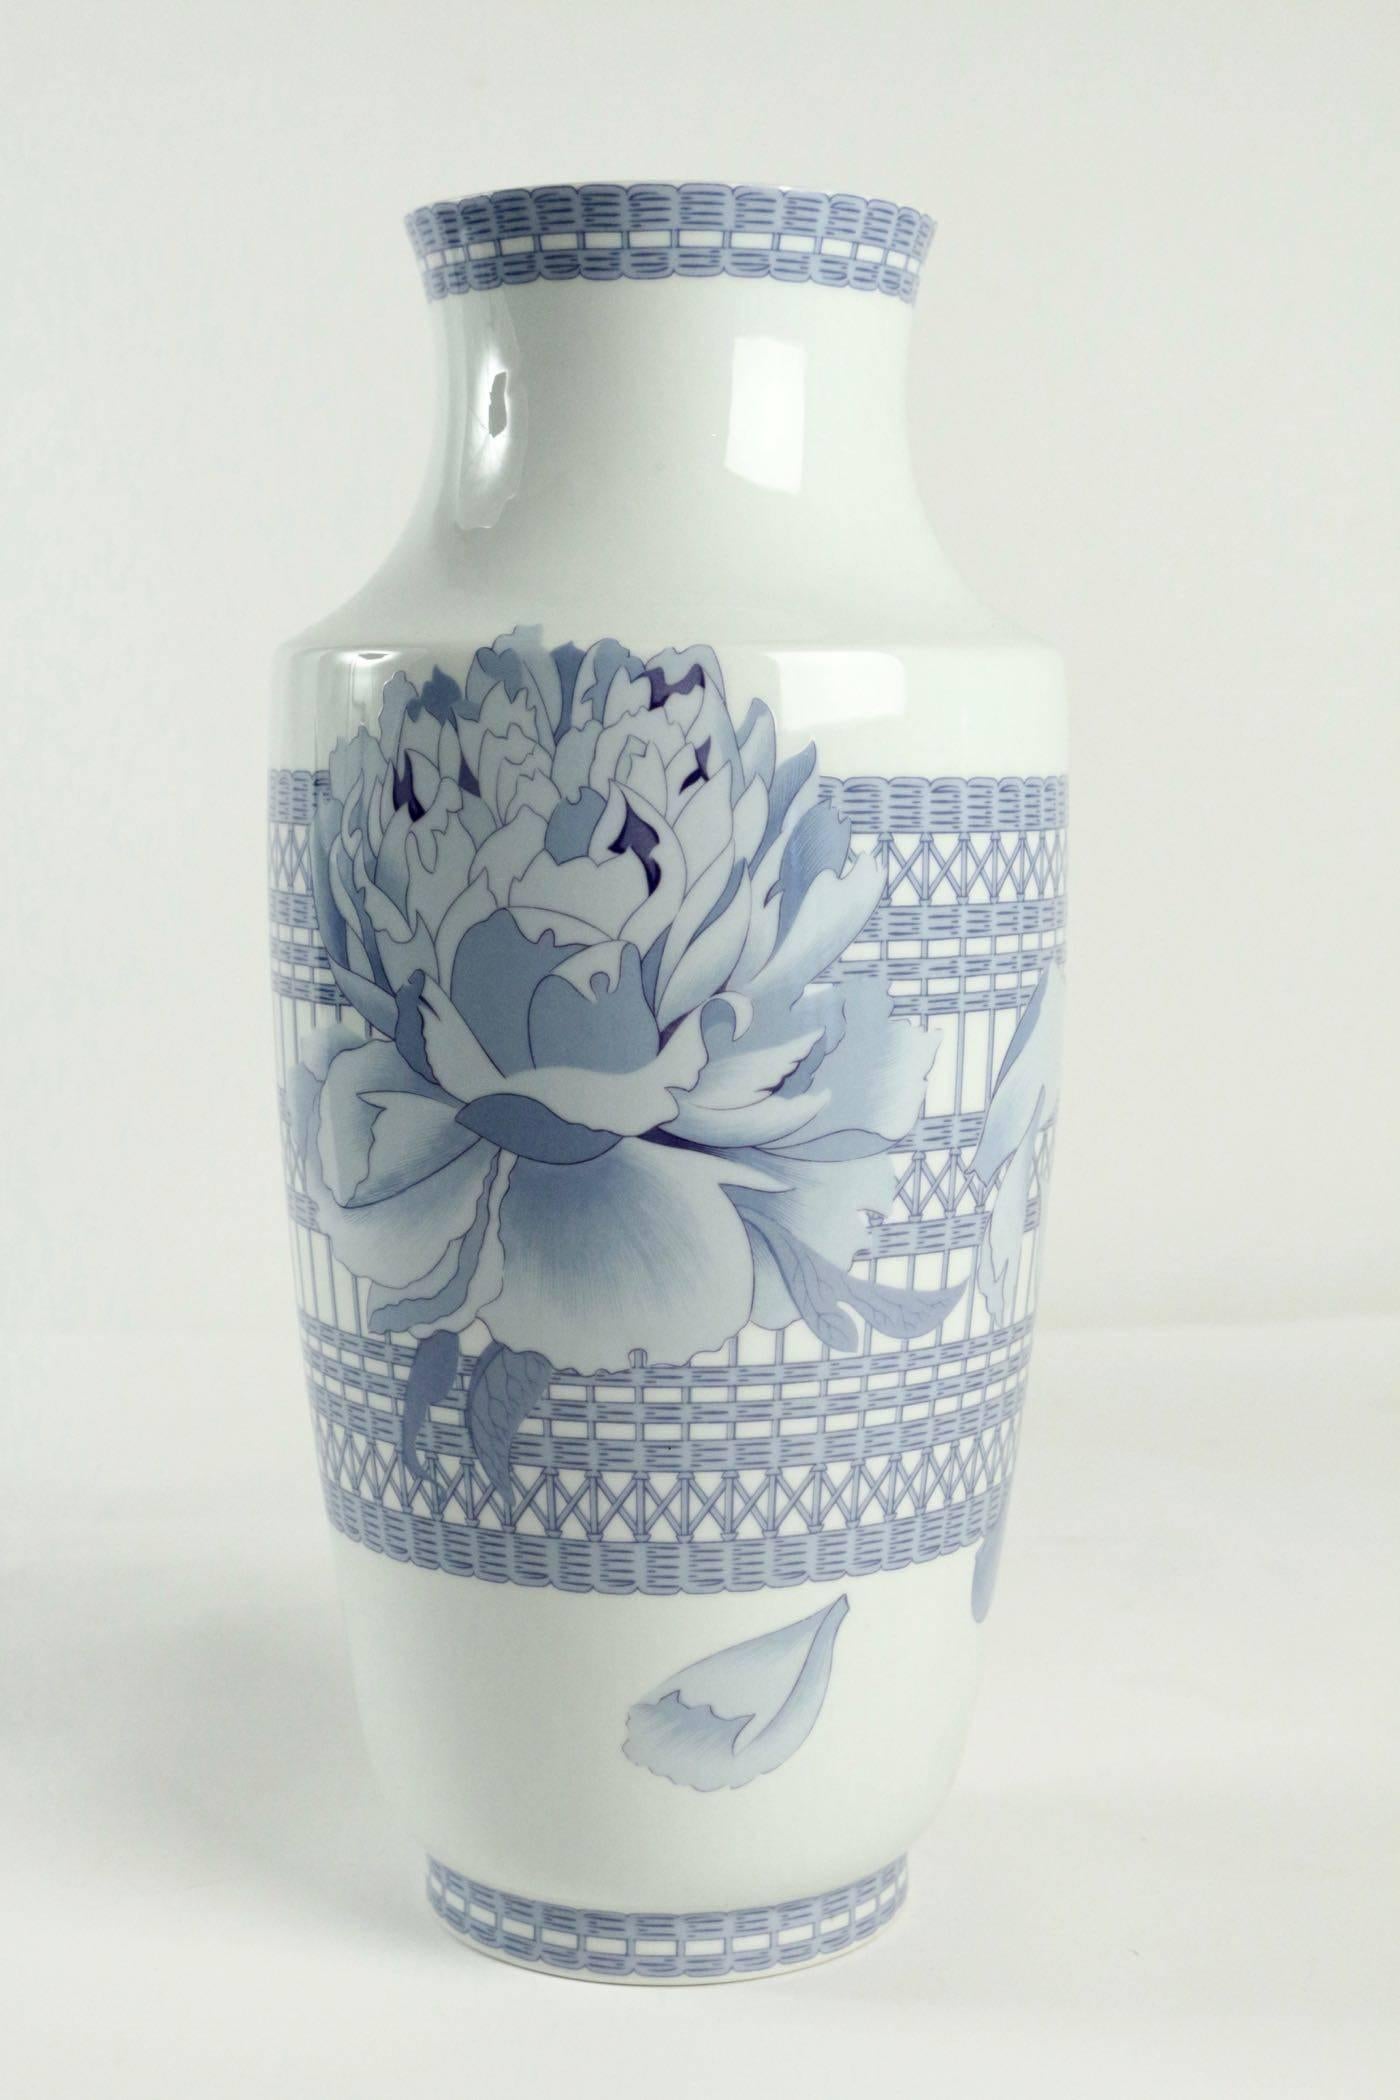 Hermes vase
Made in France
Pattern: Les Pivoines (Peonies) 
Blue peonies basket weave pattern
Vase: 12 3/4 height, 18 1/2 width, mouth of vase 4 inches 
Beautiful with fresh peonies in vase. 
In perfect condition 
This pattern has been